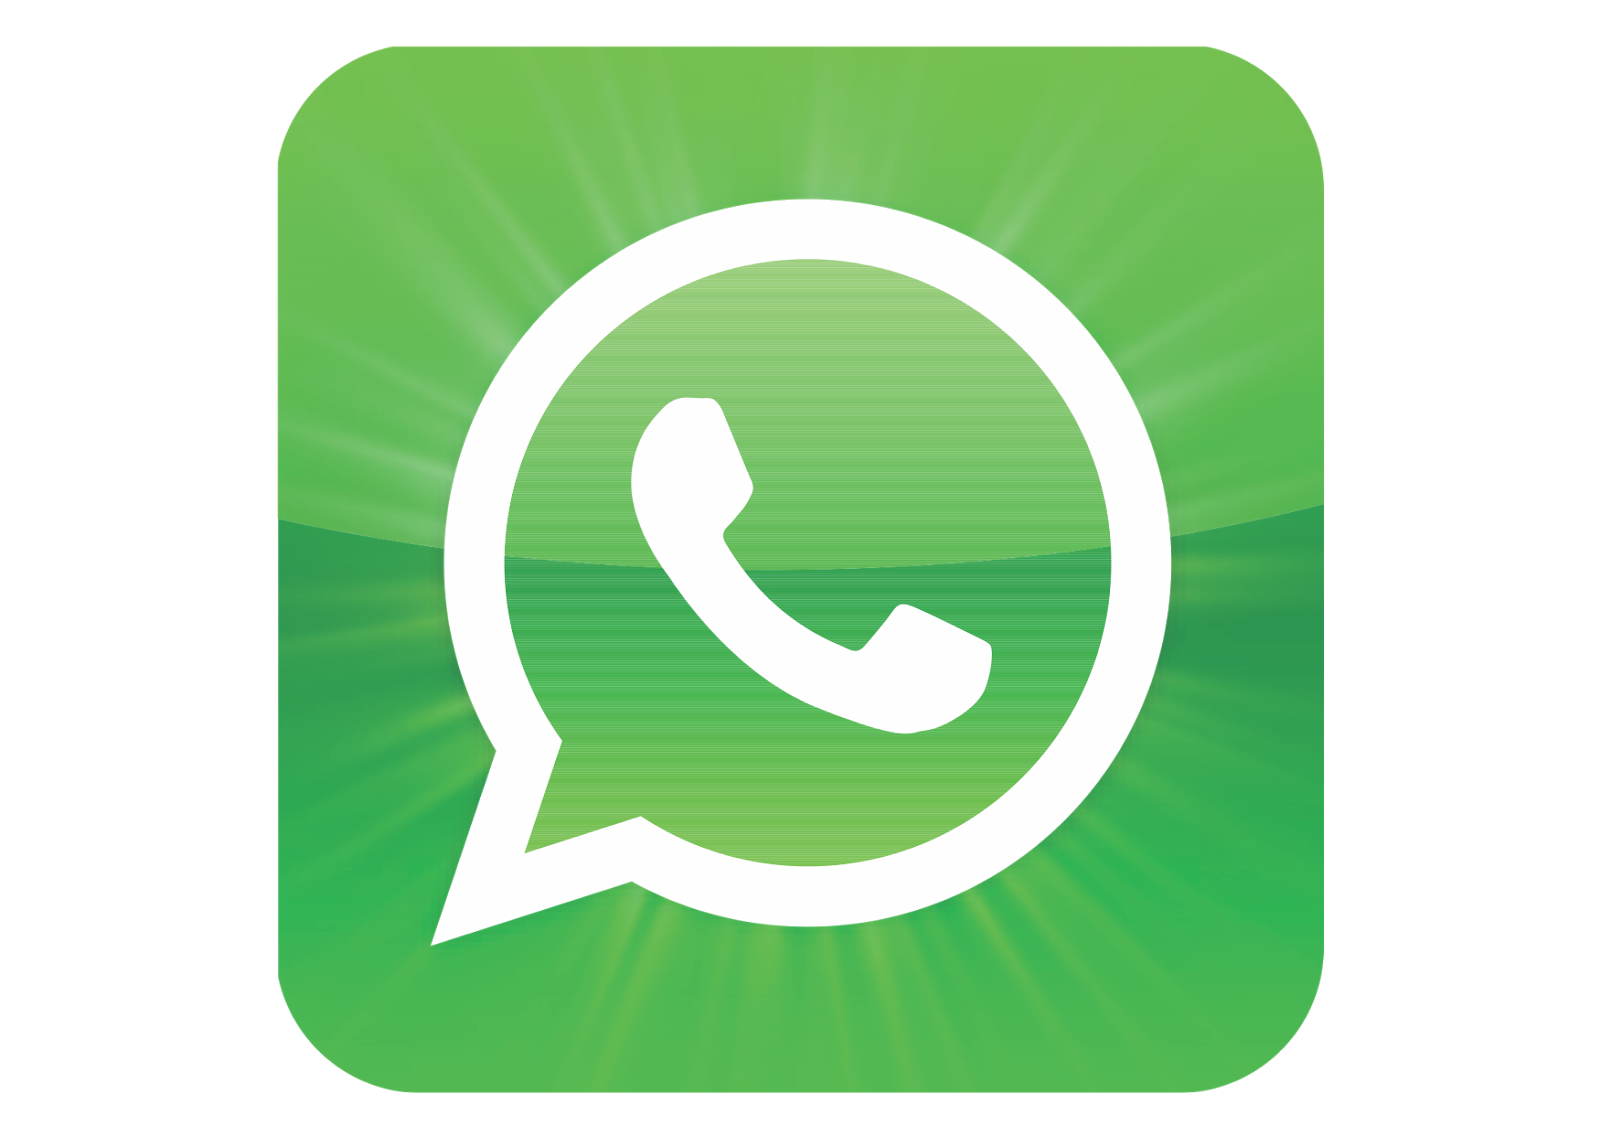  Logo  Whatsapp  PNG Photo  46045 Free Icons and PNG 